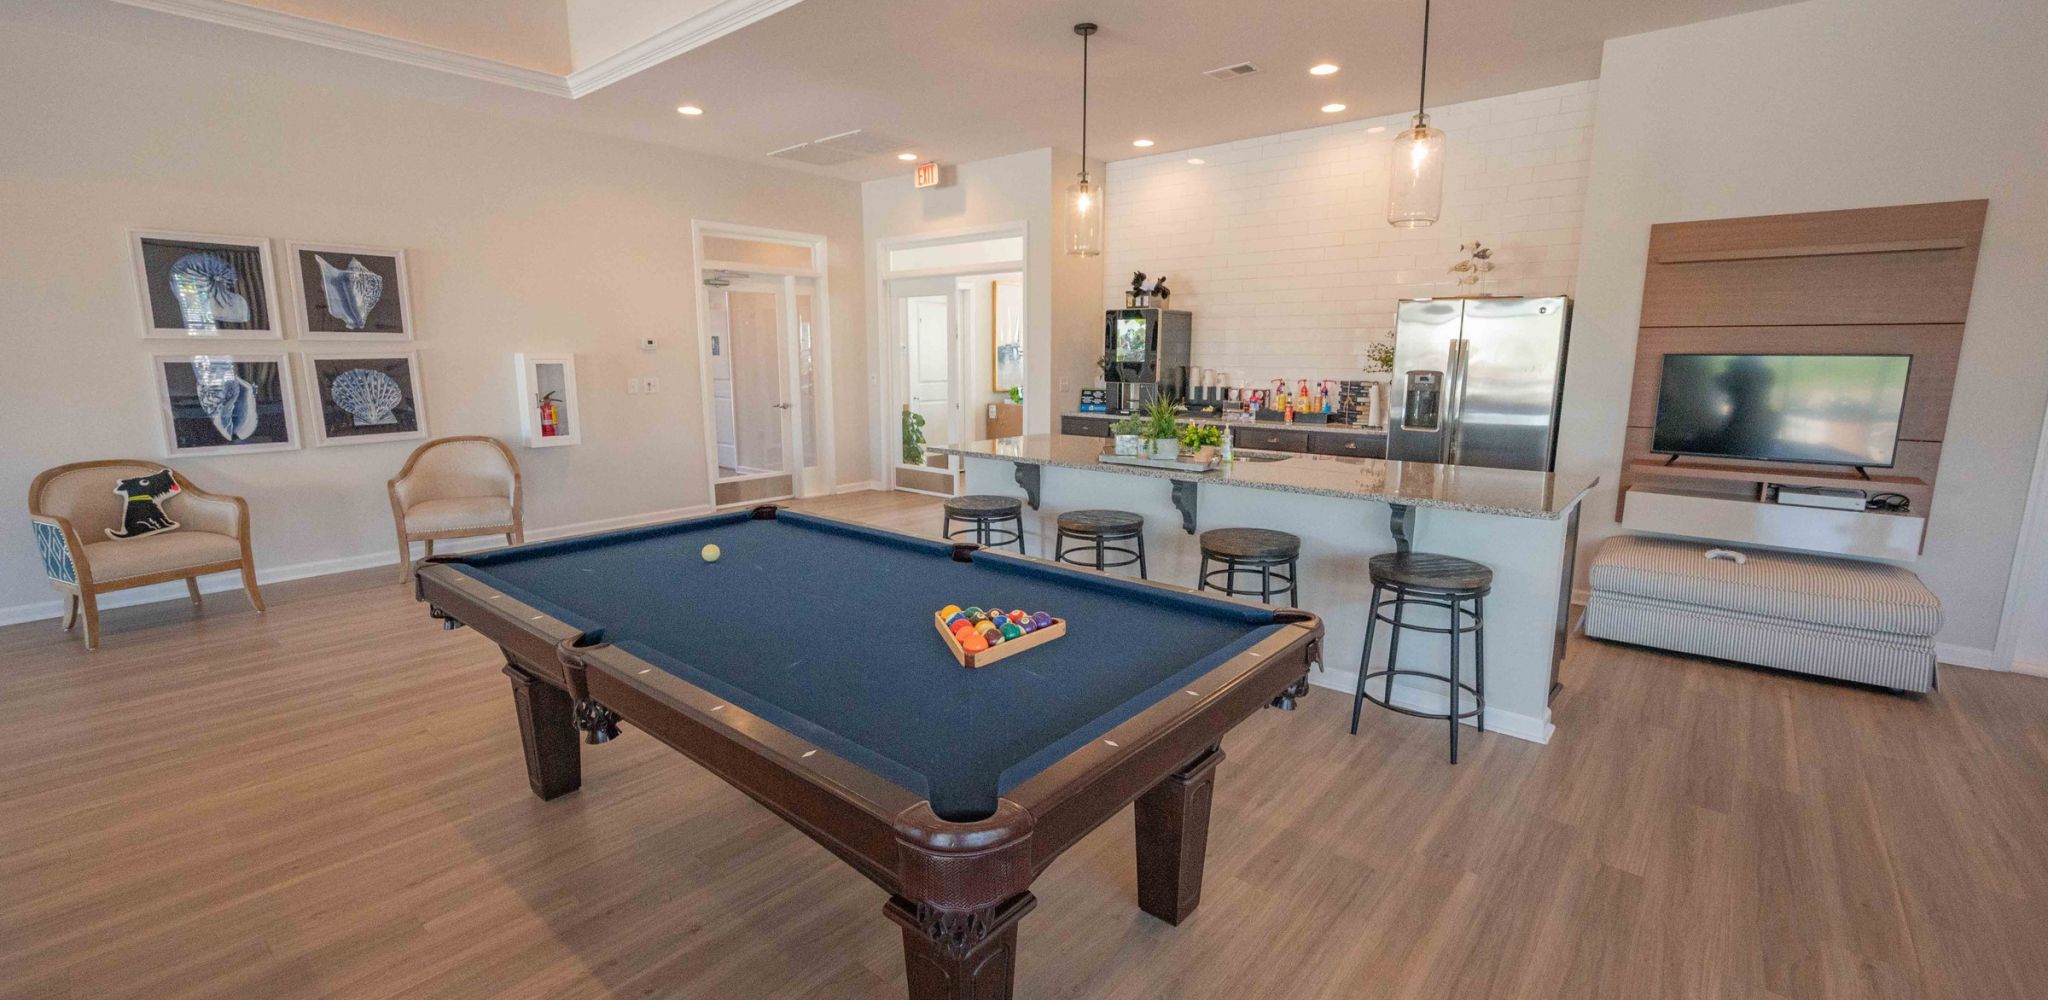 Hawthorne at the Bend amenity lounge area with pool table and entertainment space with kitchen